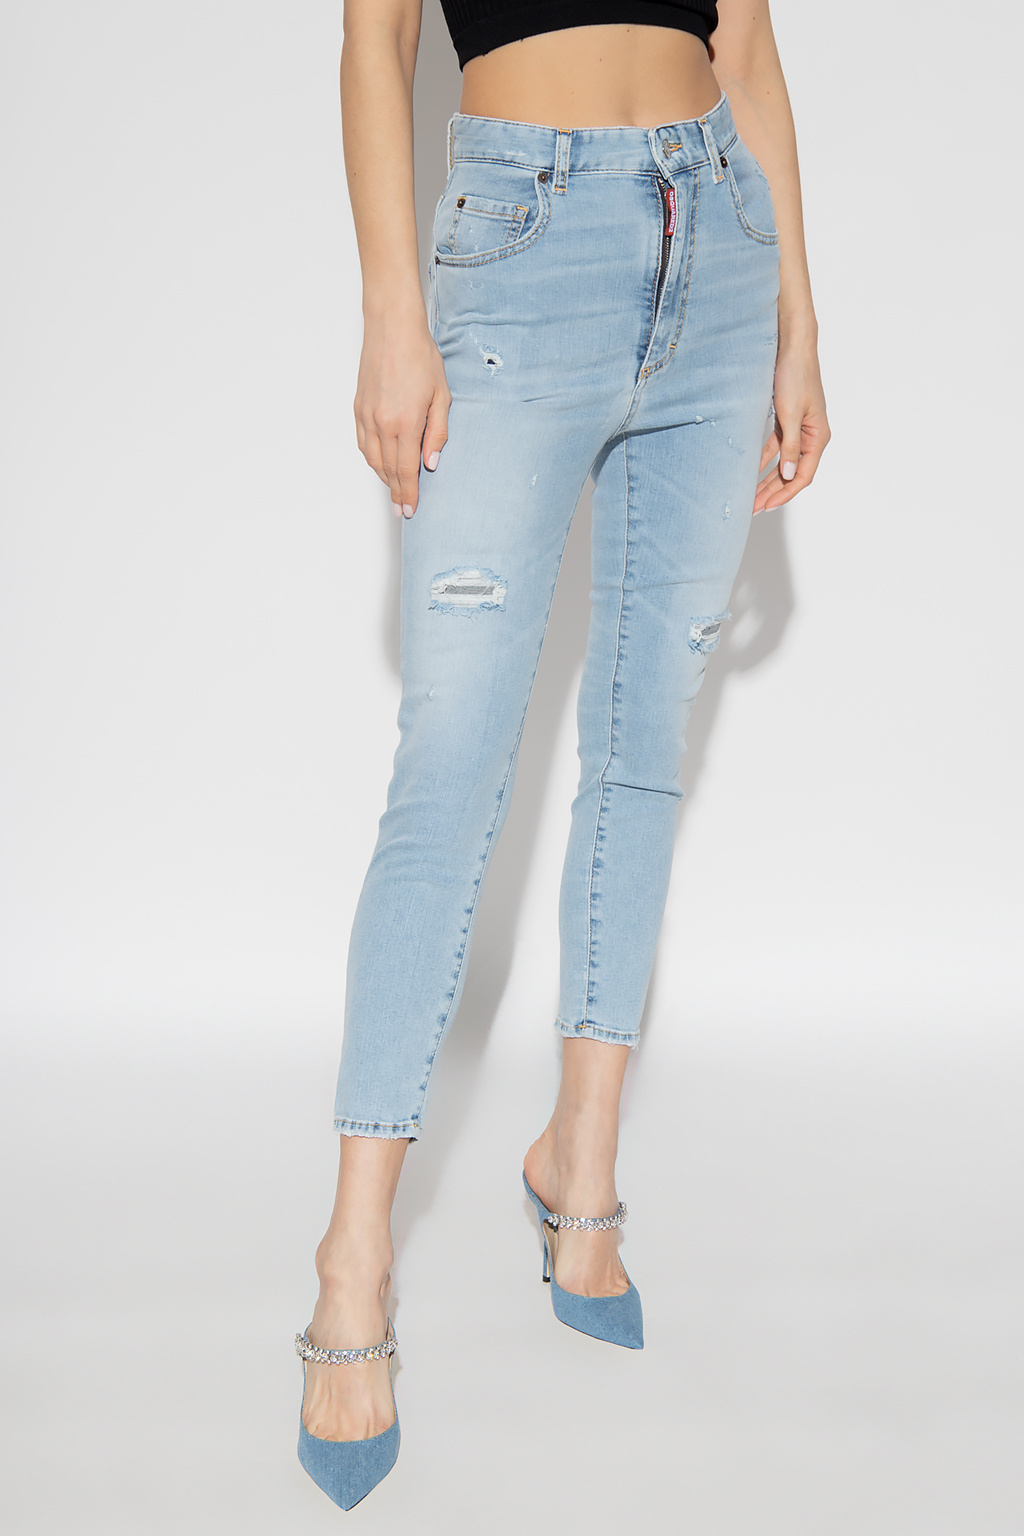 VbjdevelopmentsShops Denmark - Love this jeans so comfy soft stretchy  materal excellent fit - Light blue 'Cropped Twiggy' jeans Dsquared2